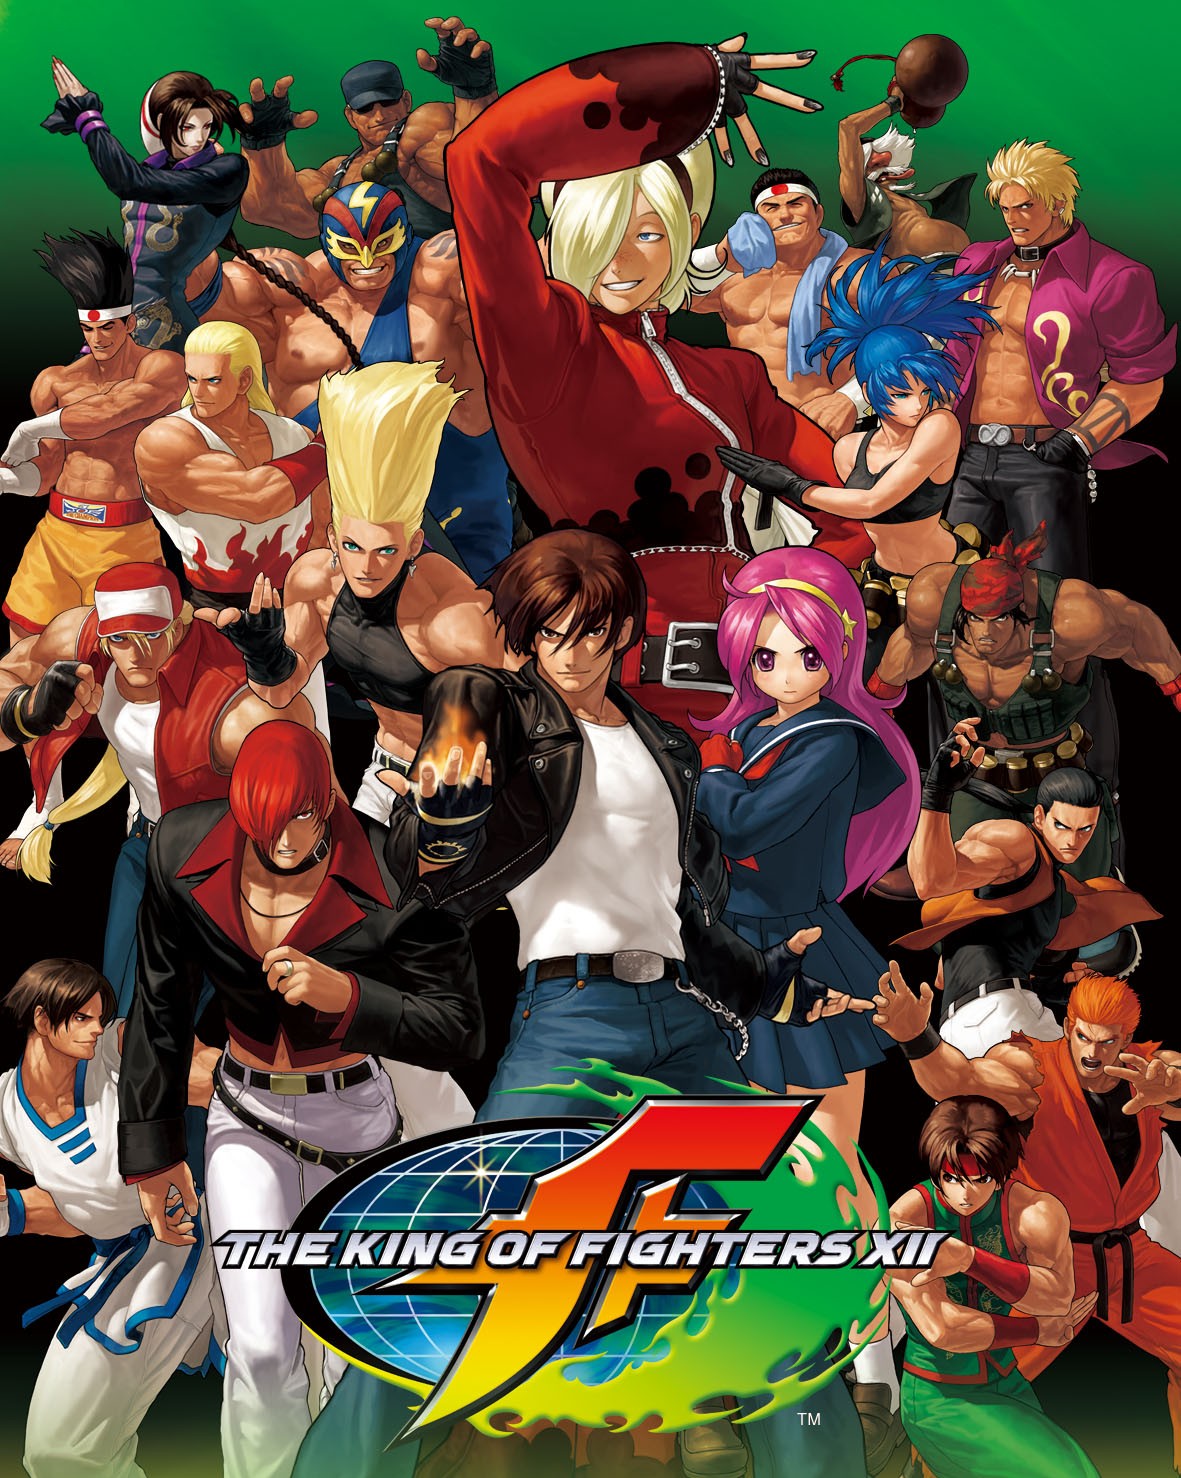 Kings Of Fighters Pics, Video Game Collection